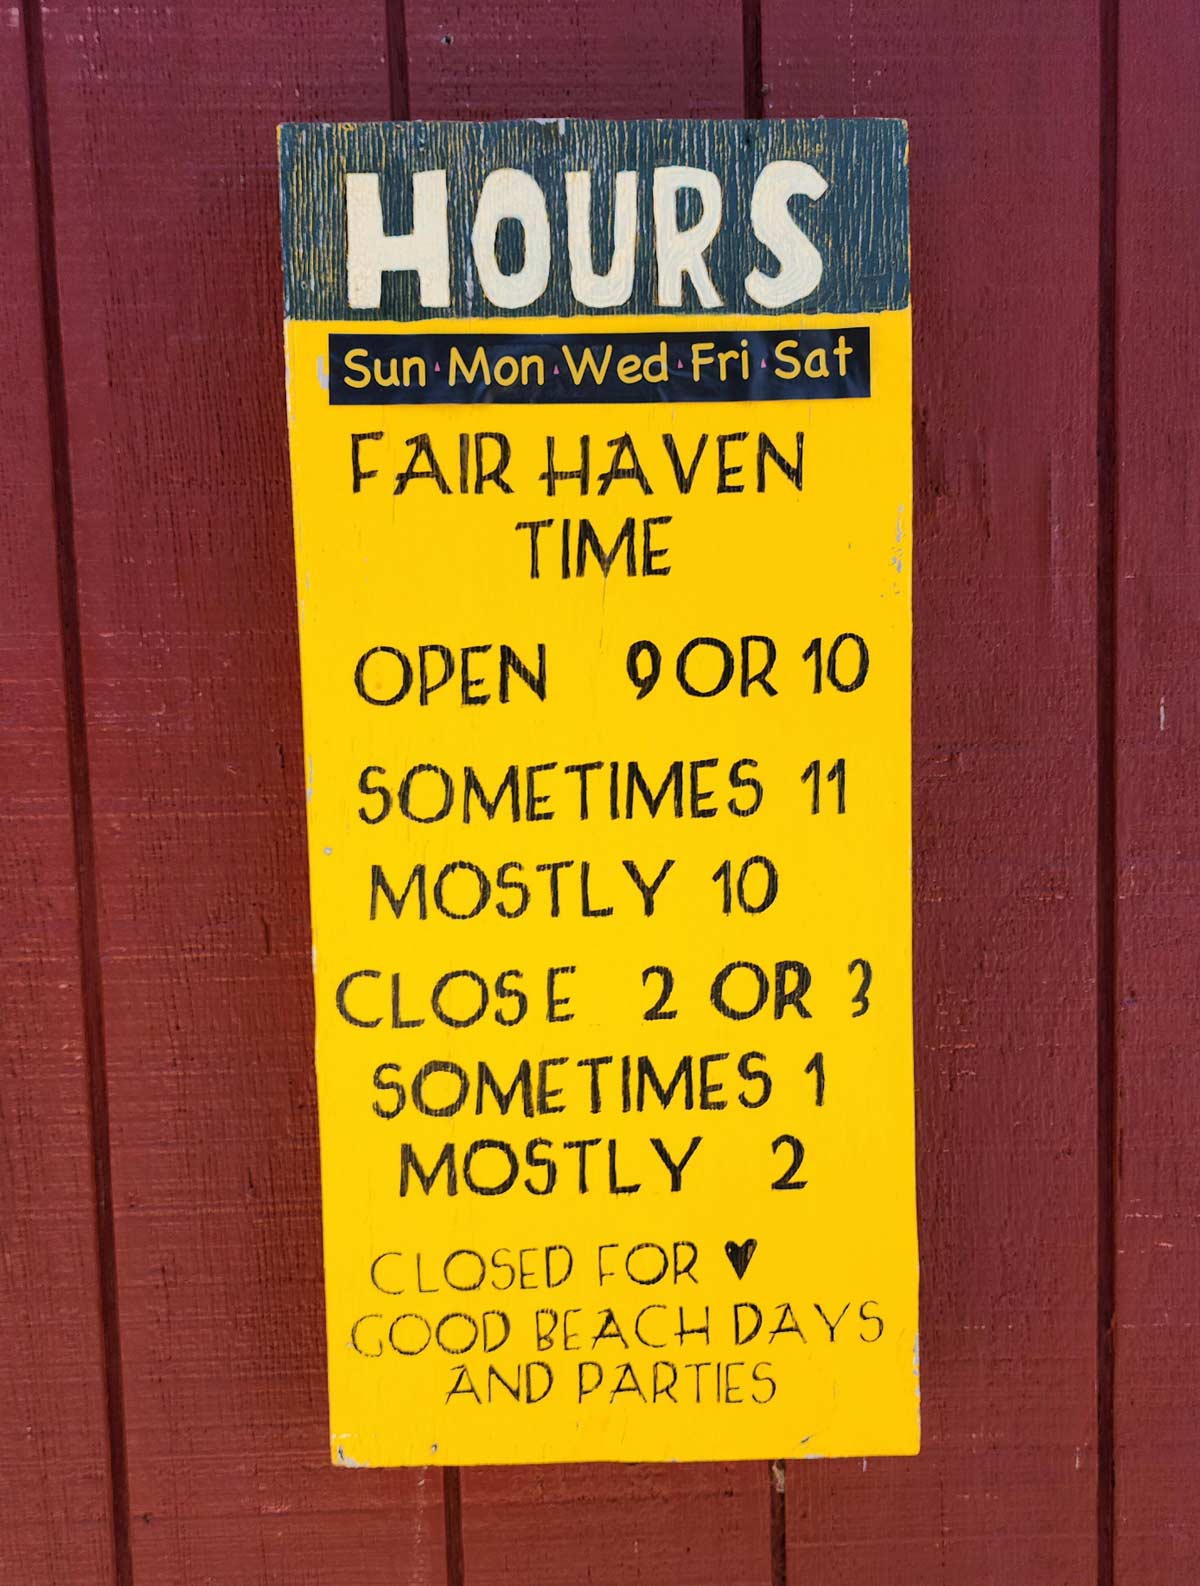 These opening hours